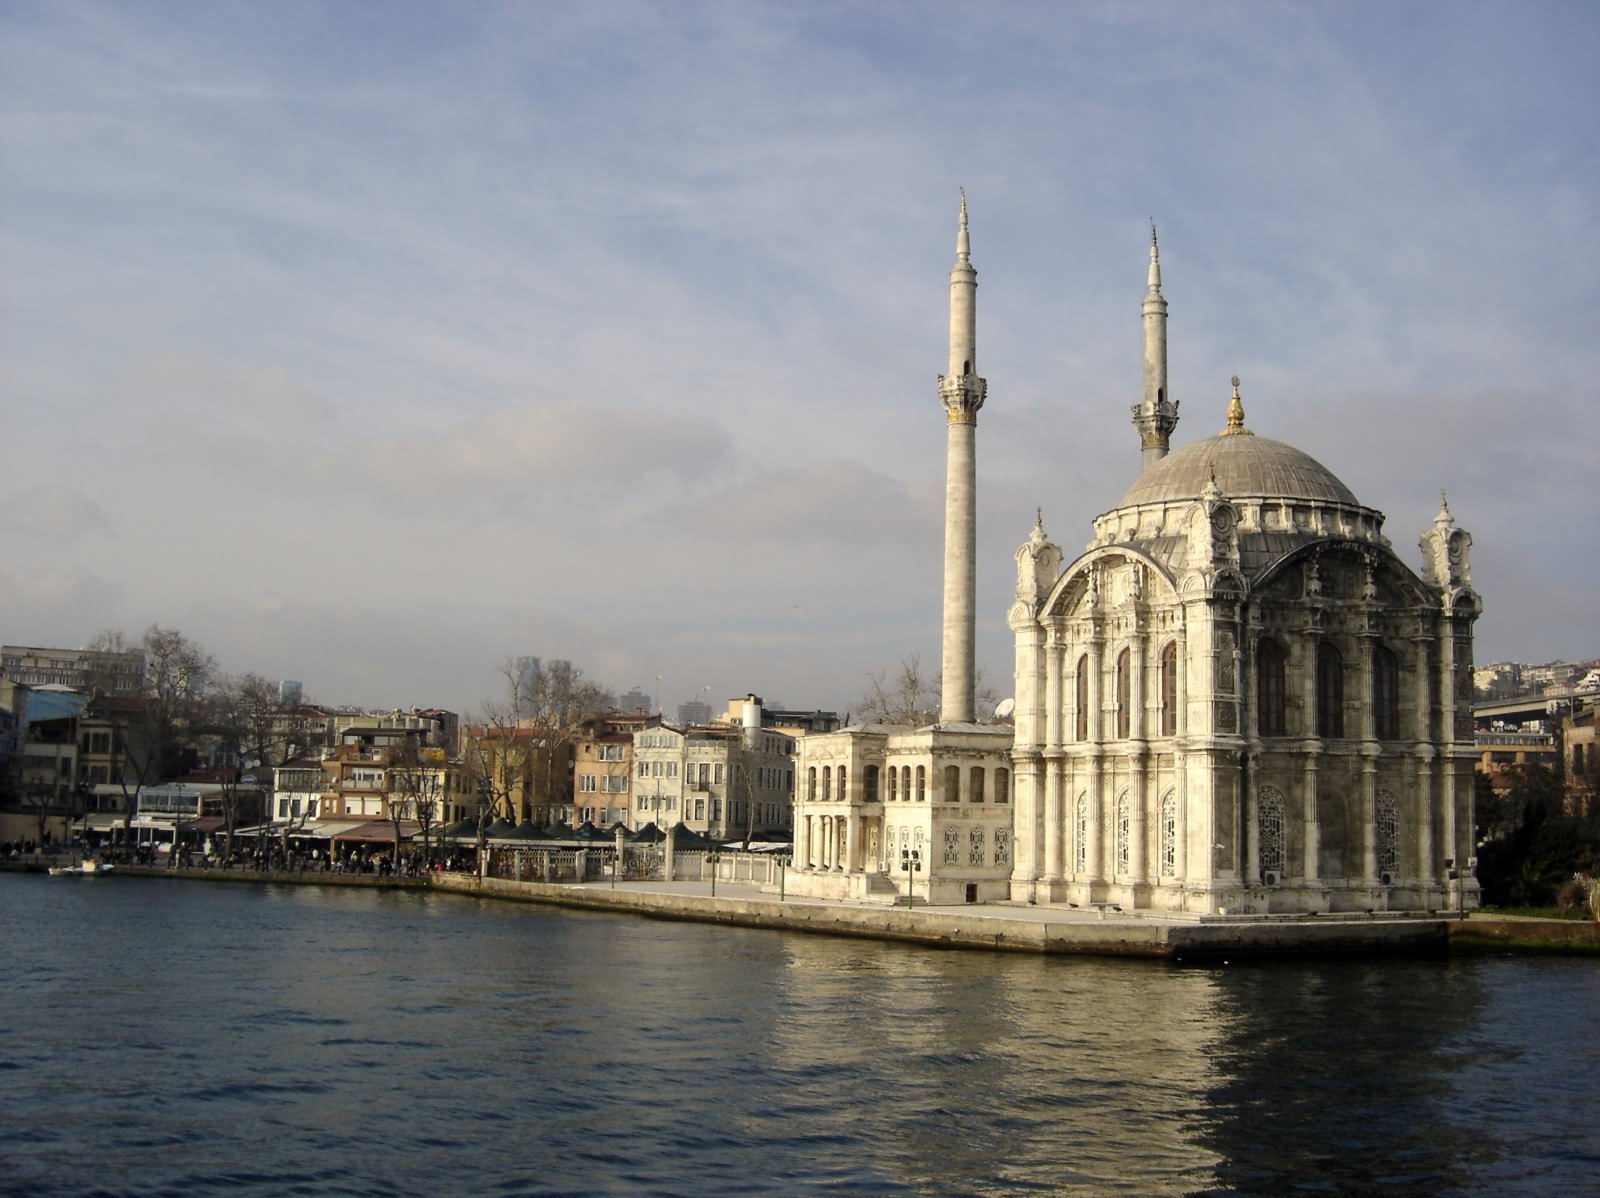 The Ortakoy Mosque On The Bank of Bosphorus River